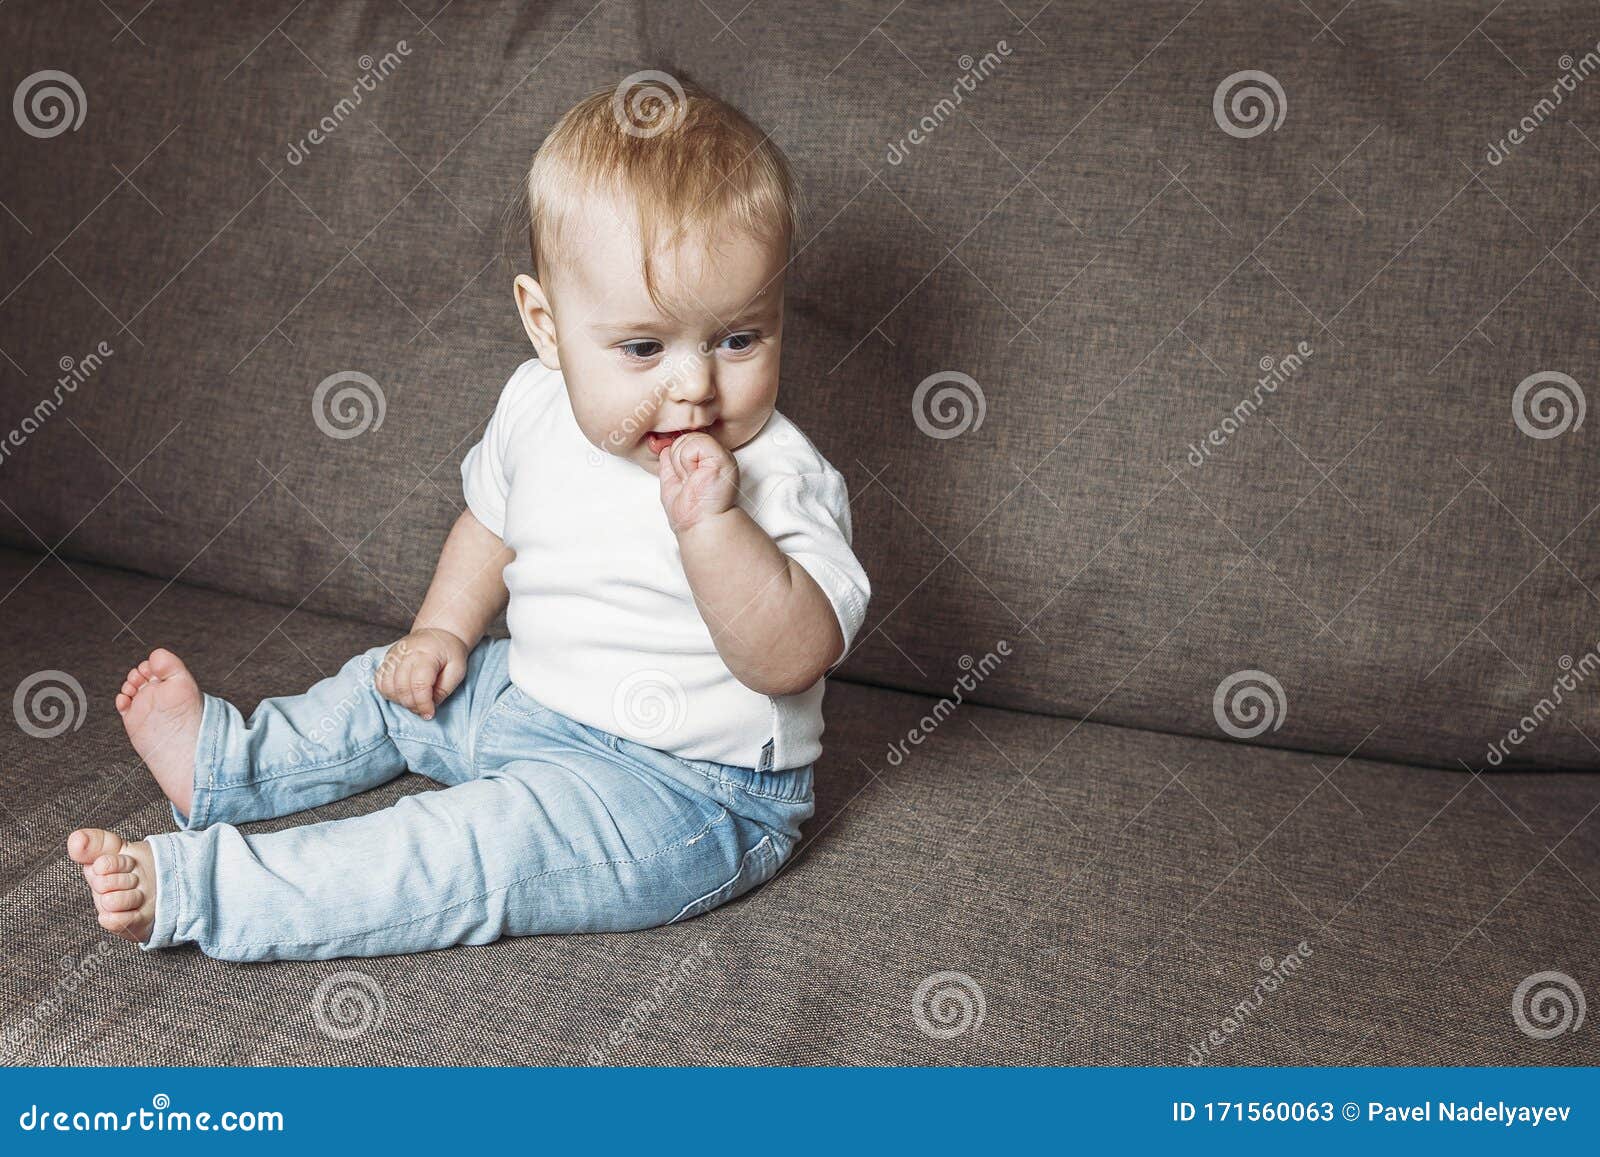 Baby Boy With Finger In The Mouth Stock Photo & More 